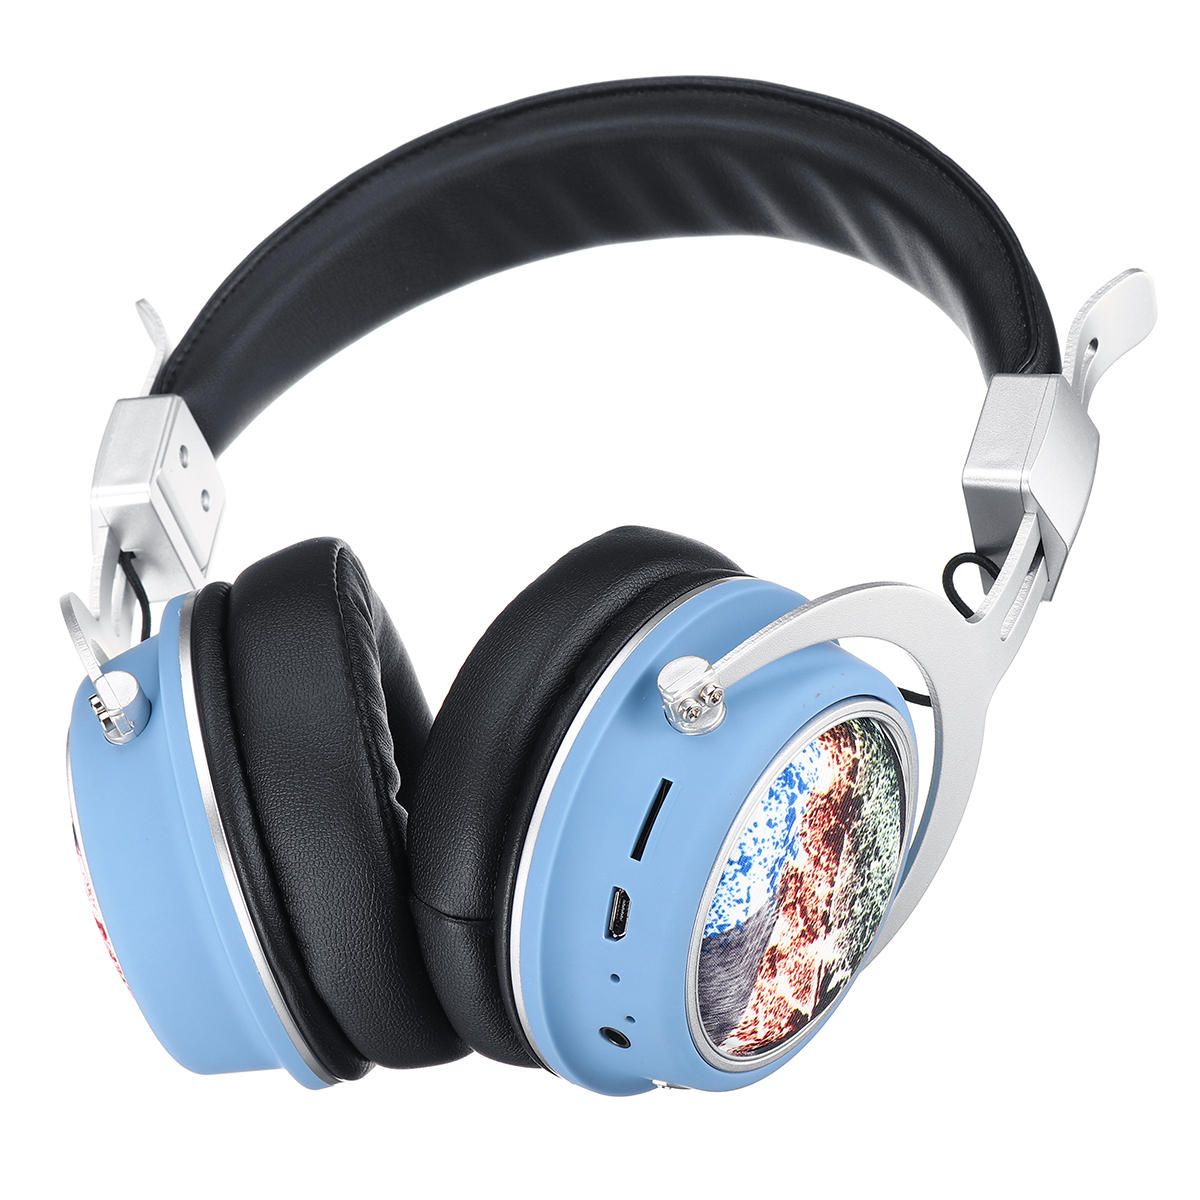 MH5 Wireless bluetooth 5.0 Headphone Foldable Pattern 3D Stereo TF Card AUX Headphone with Mic COD